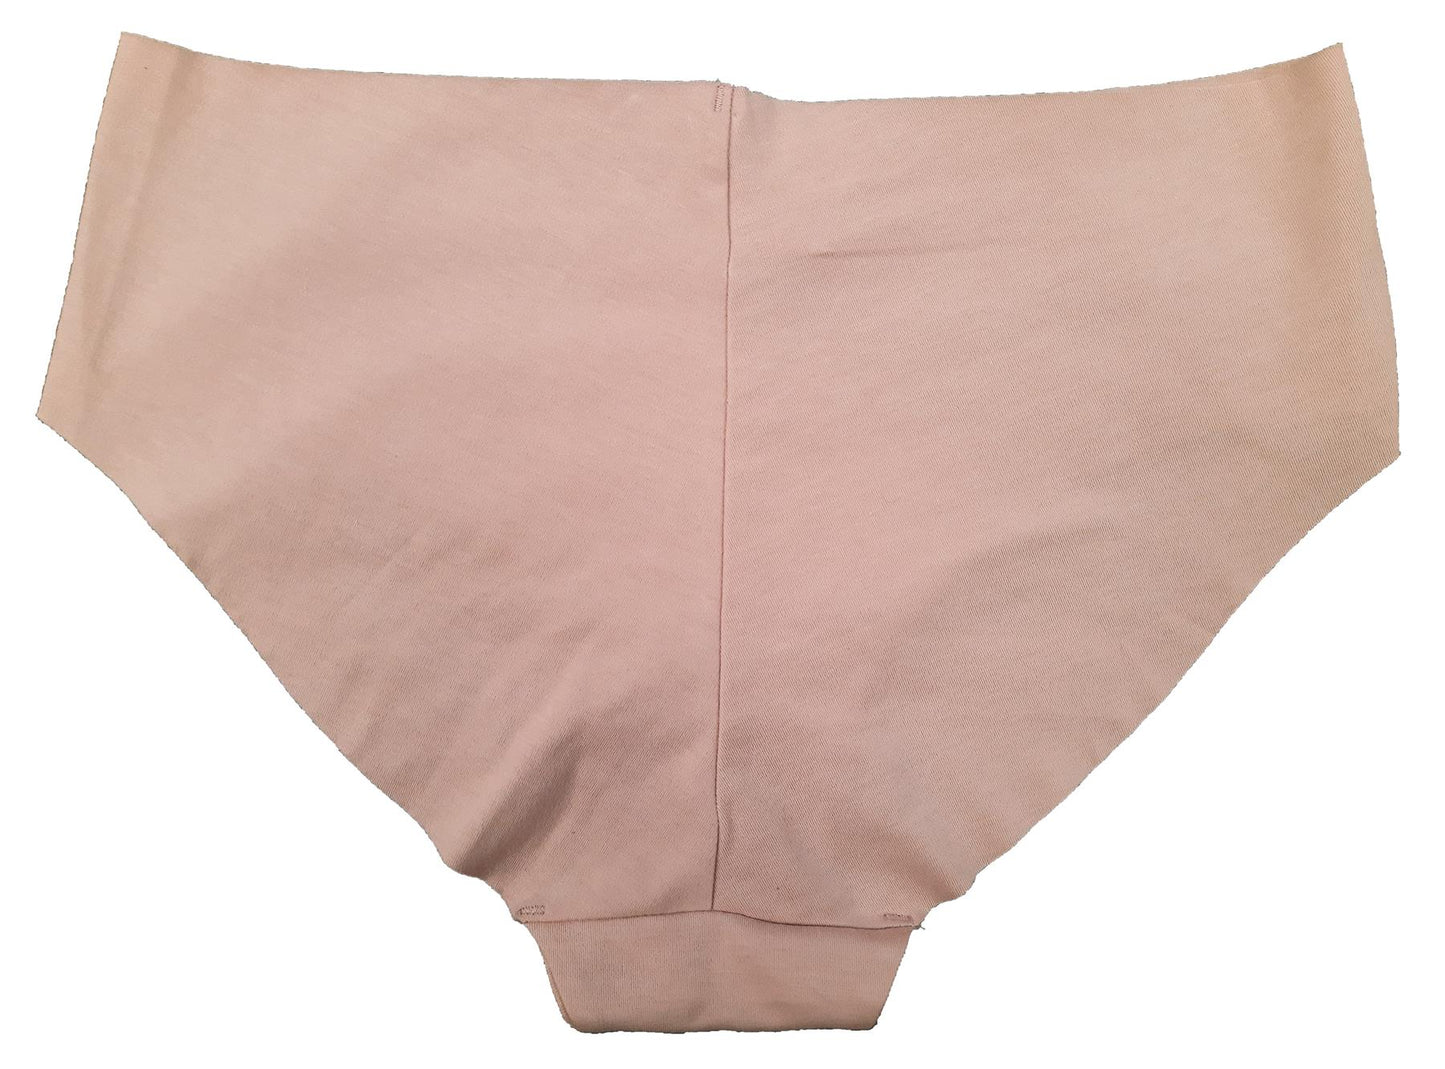 Oysho Full Brief Knickers Cotton Rich 2 Pack No VPL Brand New